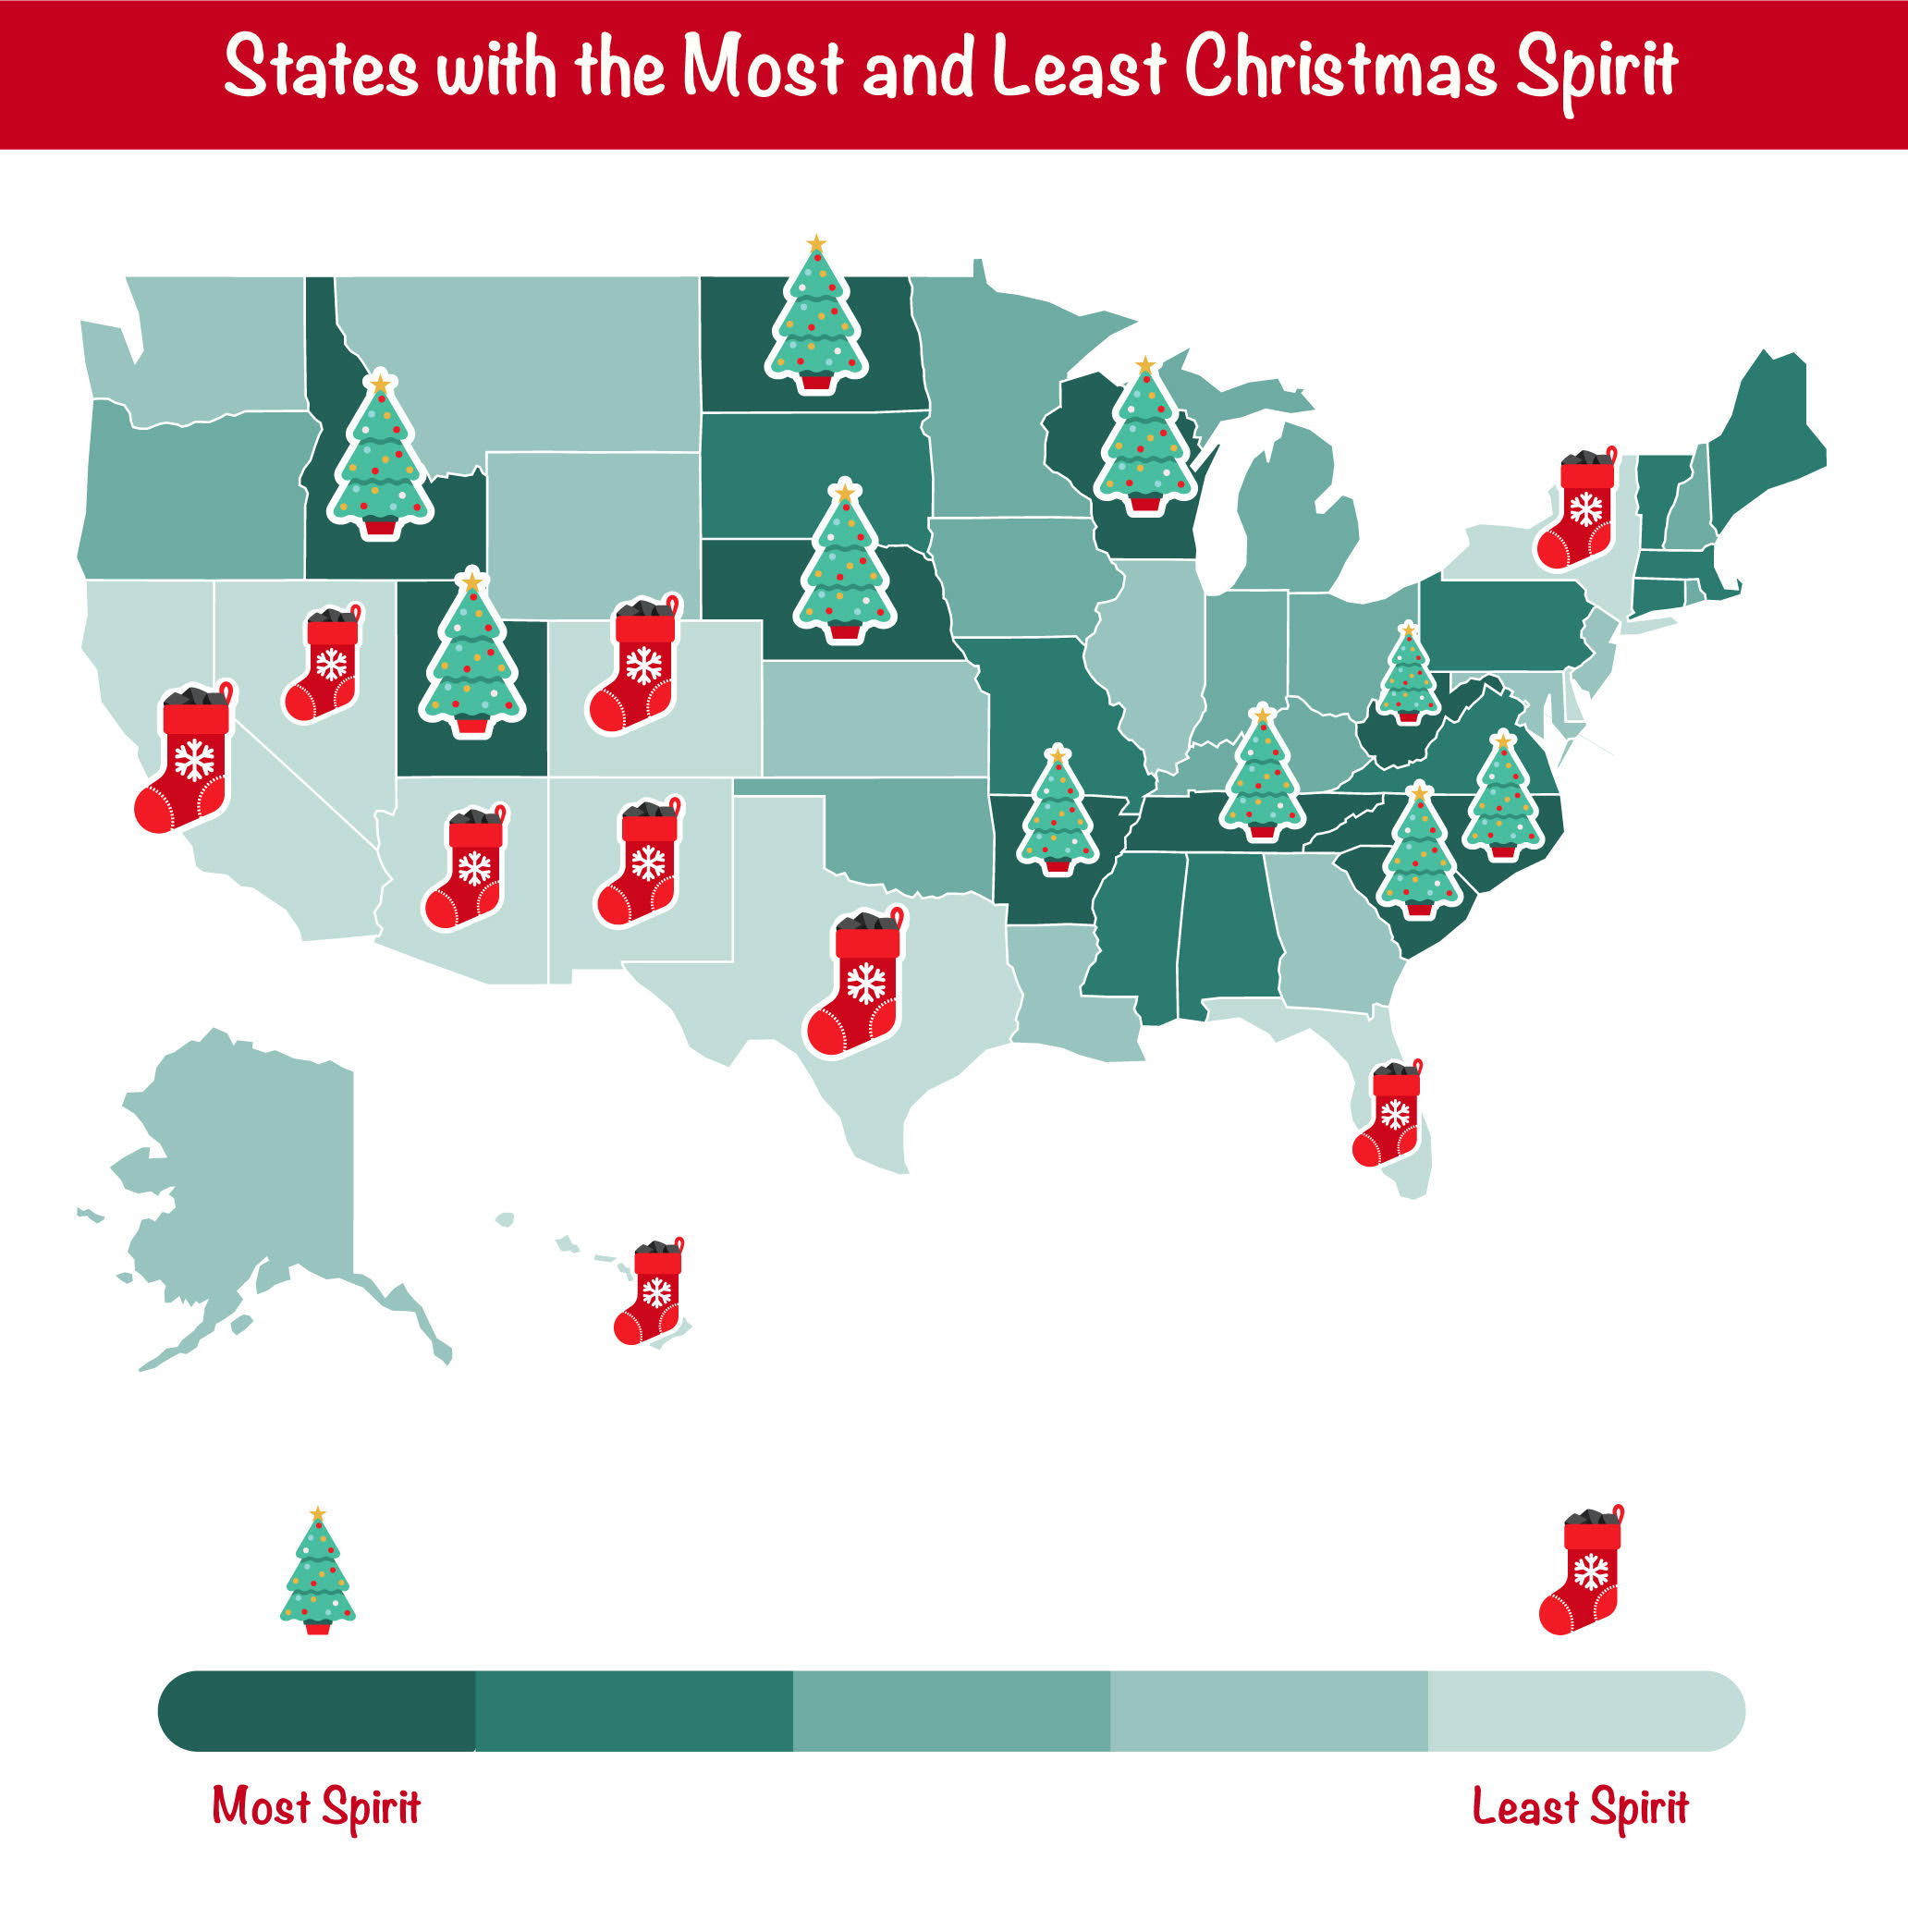 The U.S. States with the Most Christmas Spirit